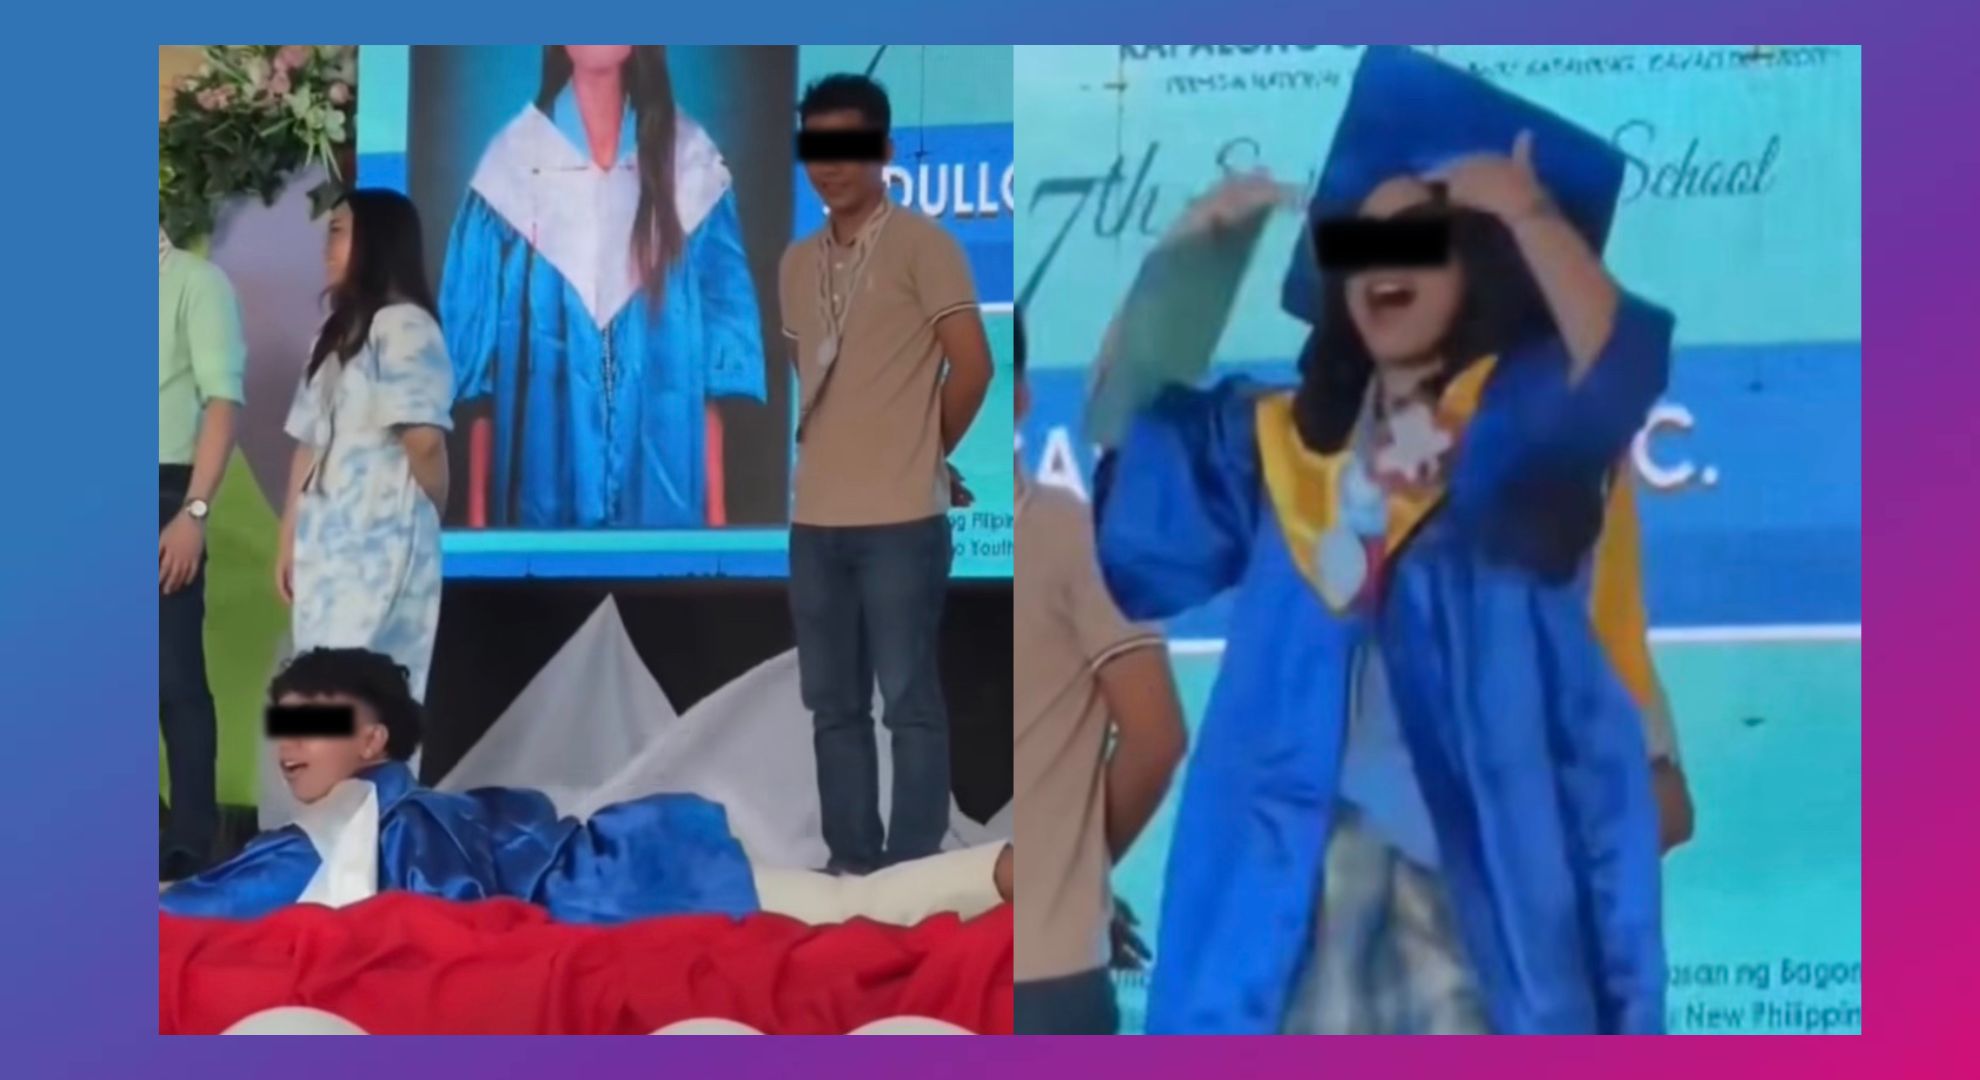 Students twerk during graduation rites, get lambasted on social media for ‘inappropriateness’